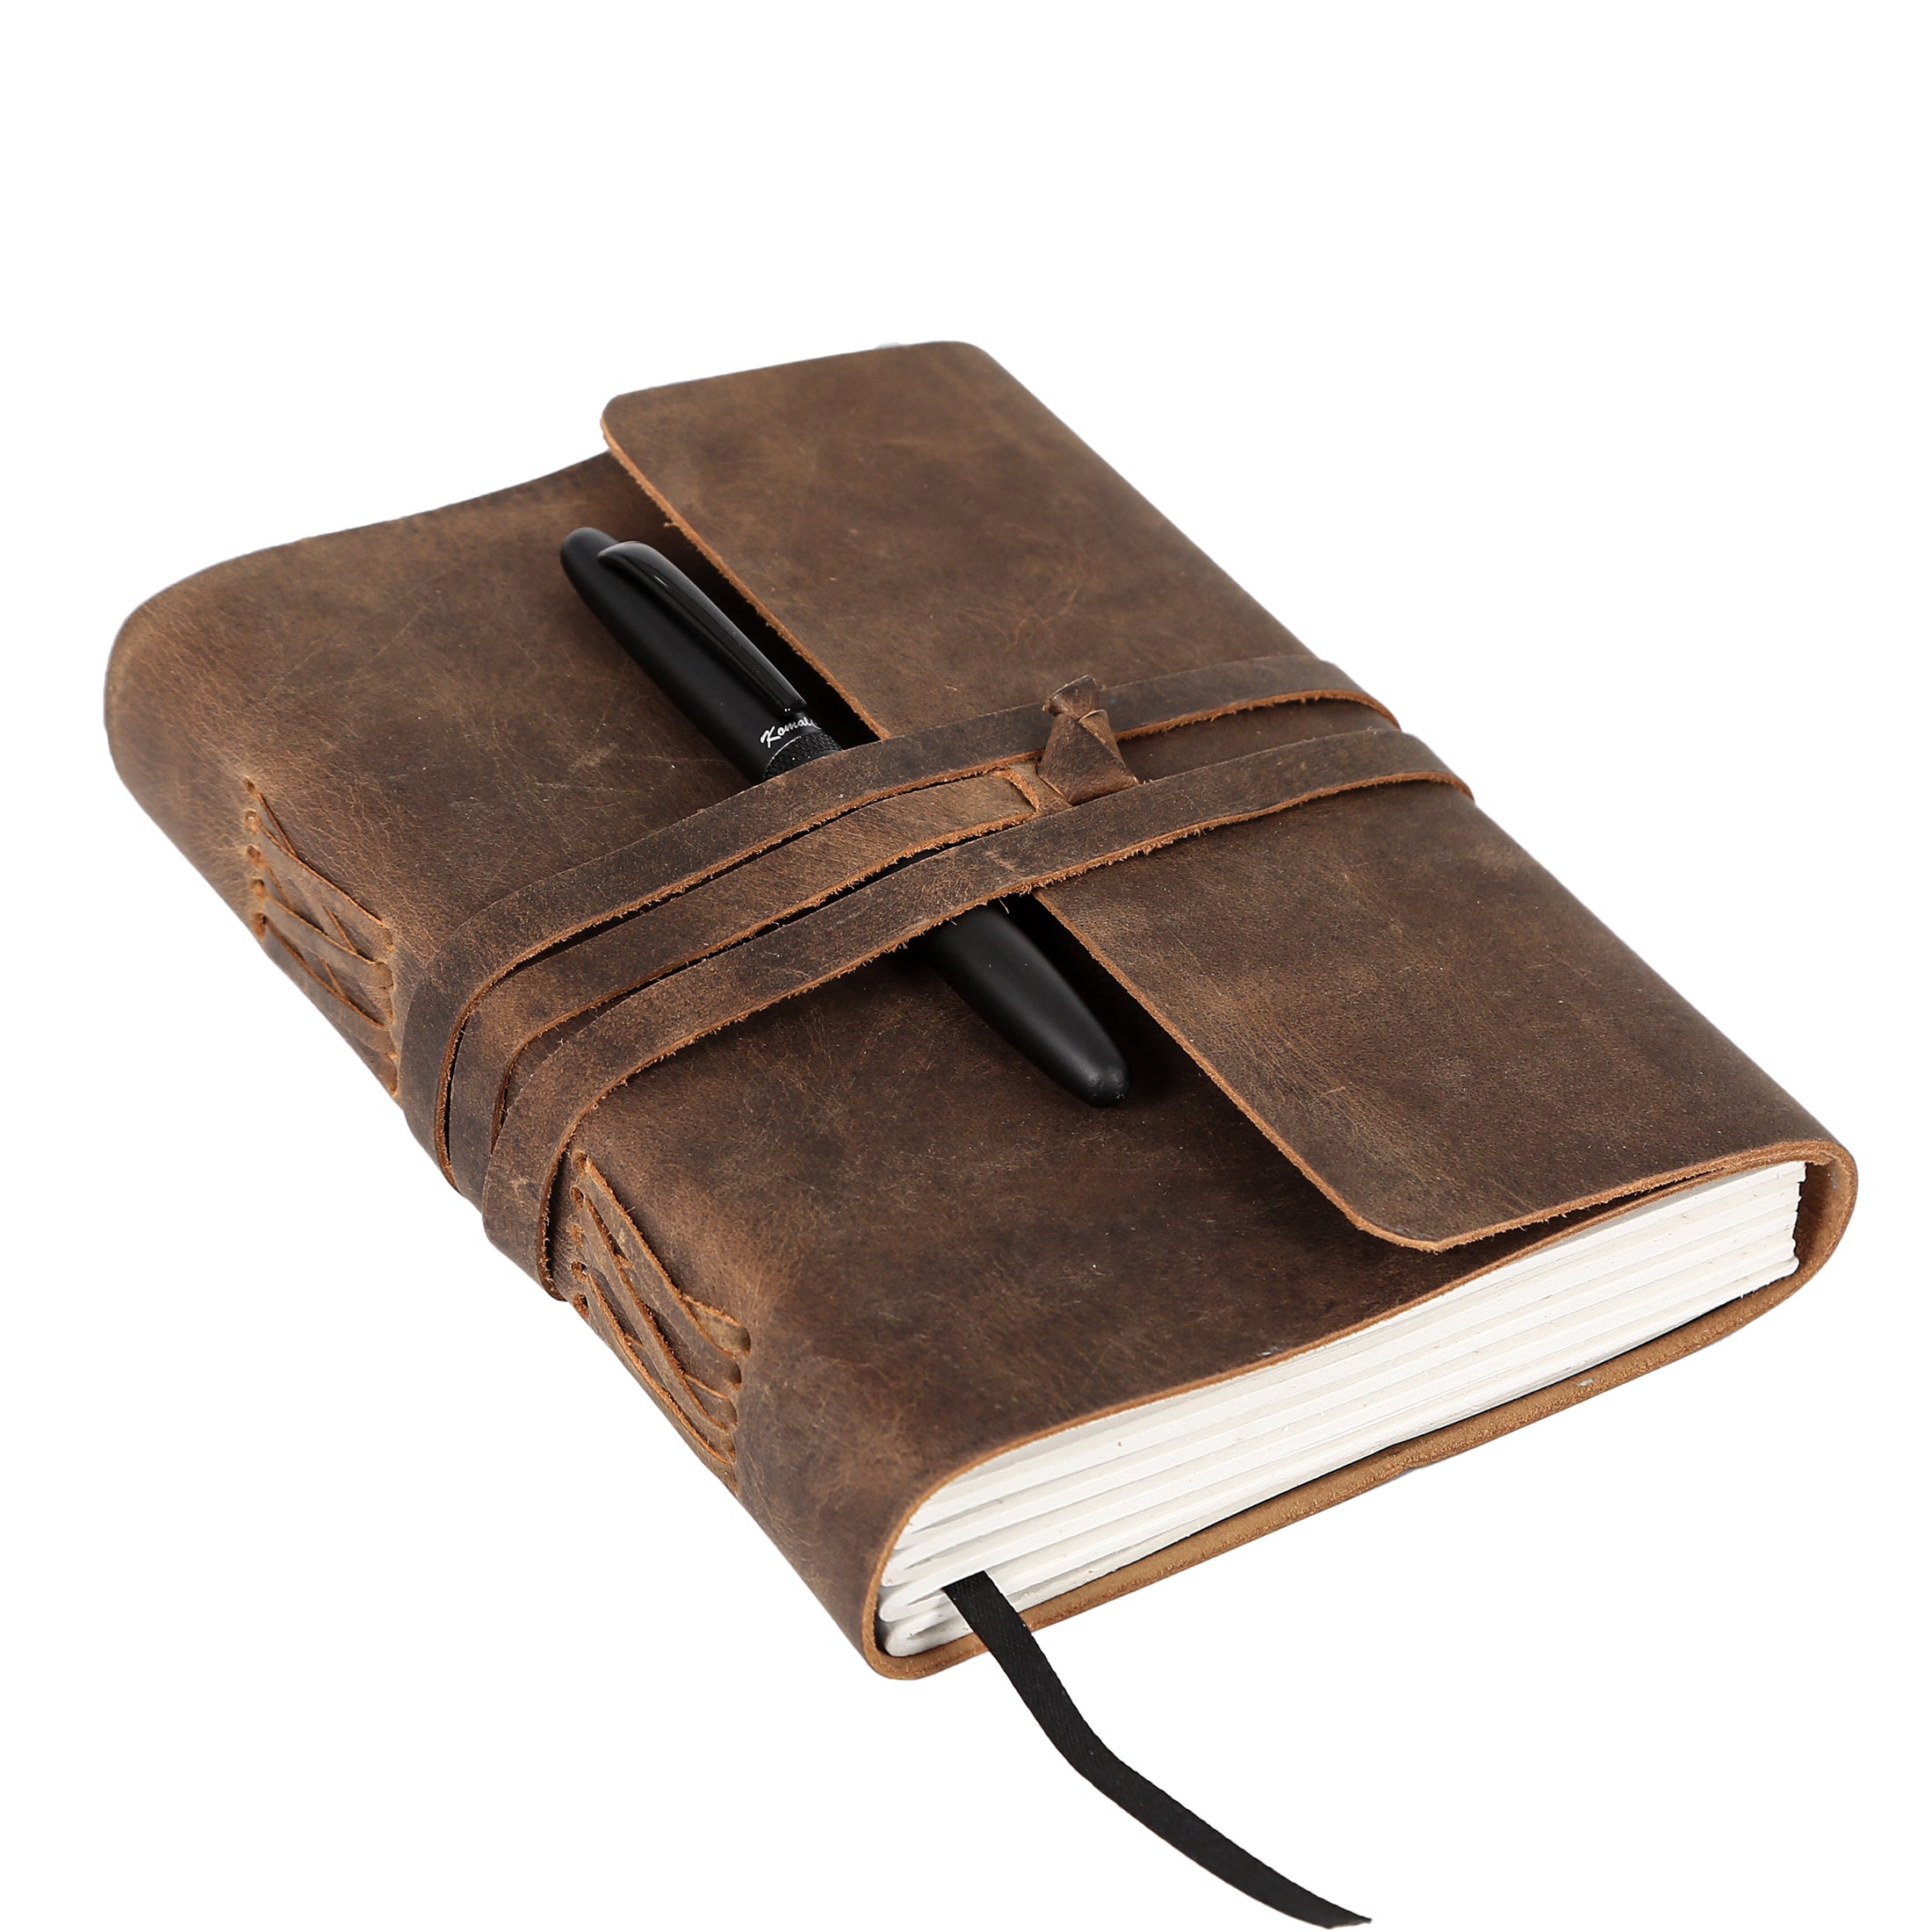 Handmade Leather Journal/Writing Notebook Diary/Bound Daily